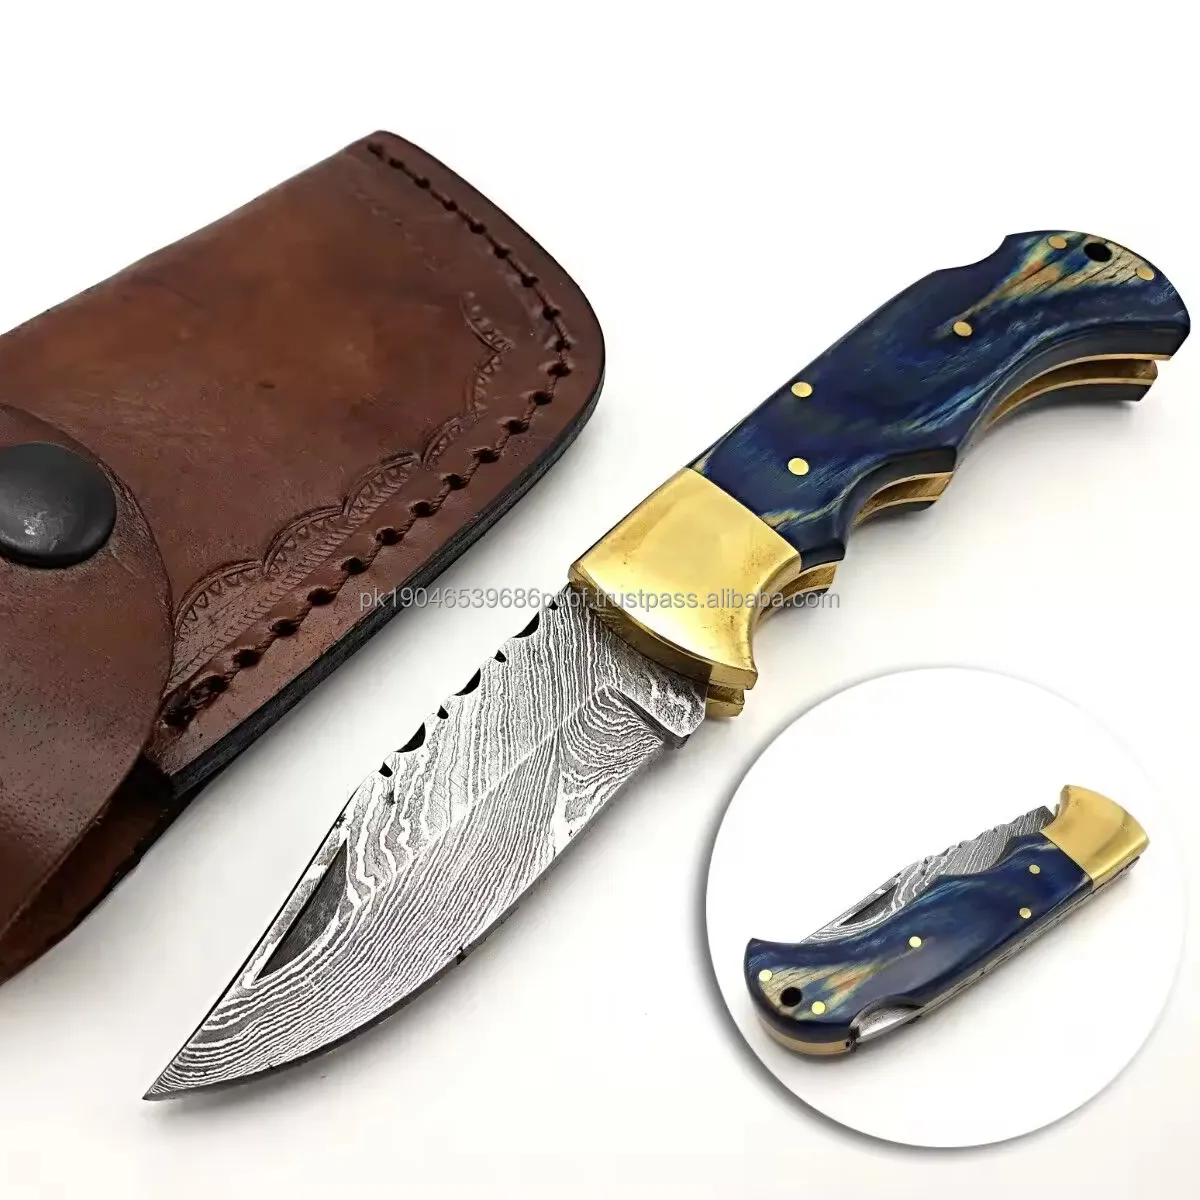 Industrial Grade 0.013in Thick MT-FK-0061 Custom Mini Pocket Knife Multi-Functional Camping Folding Pocket Knife with Sheath